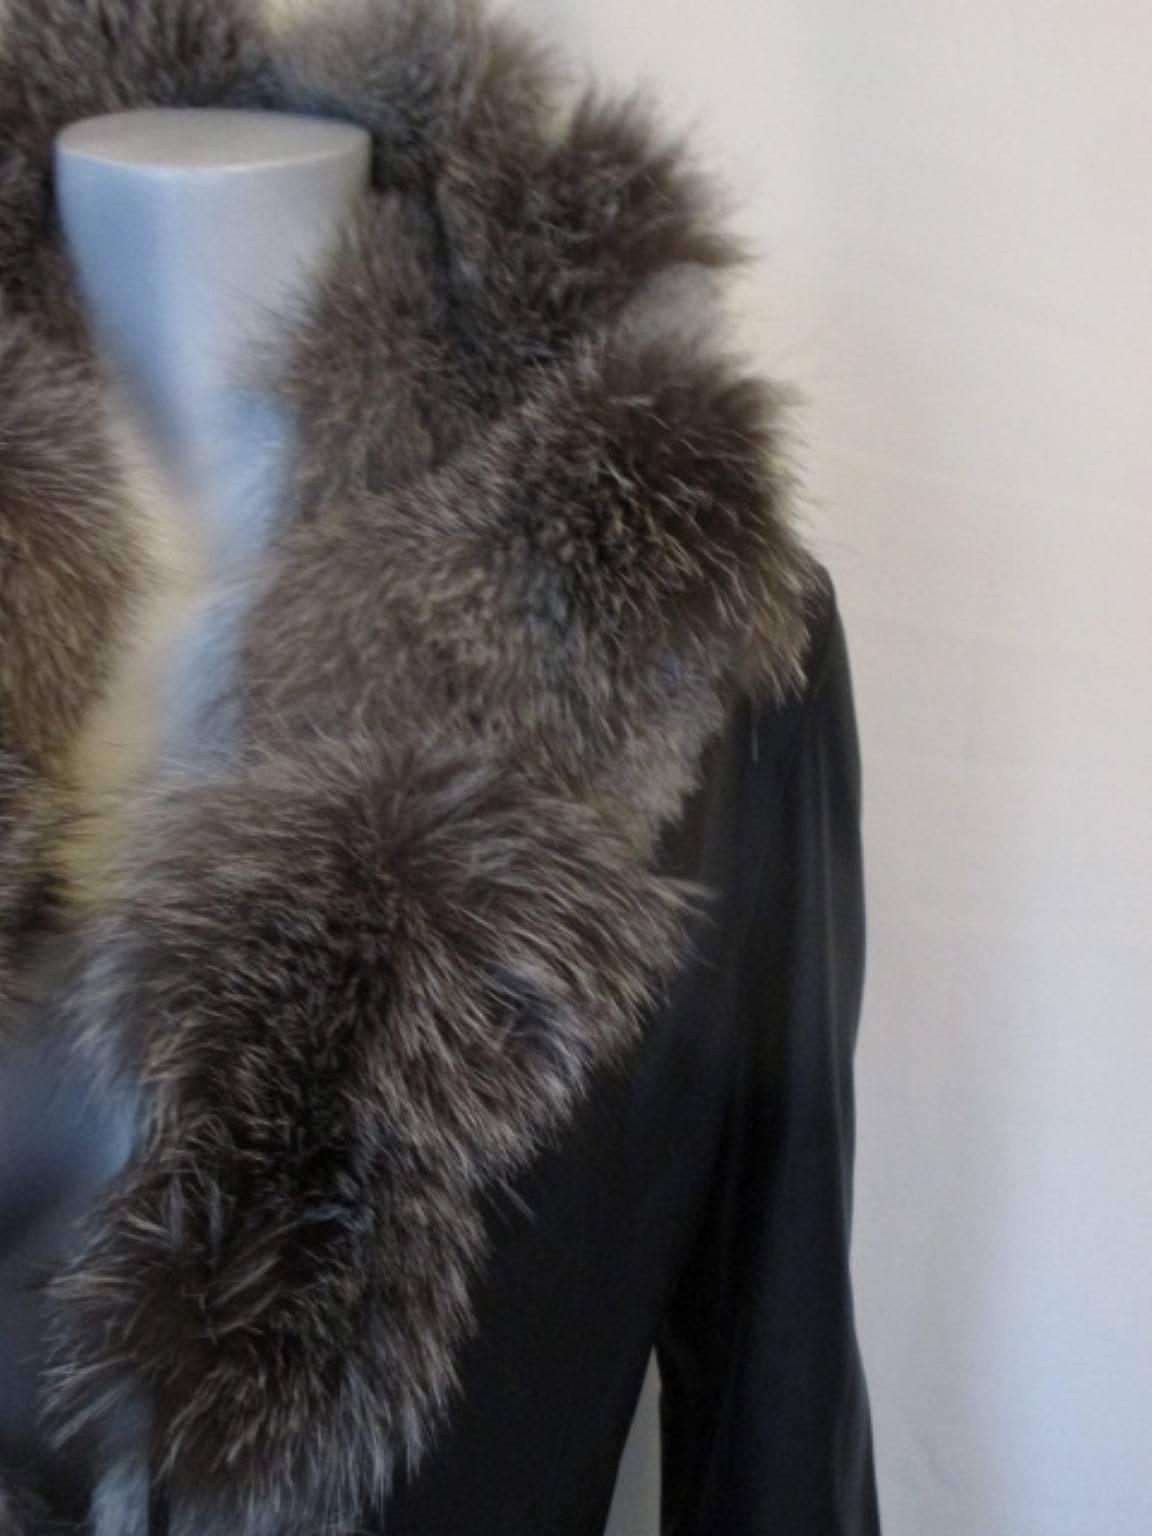 This beautiful jacket is made from soft buttery leather and soft silver fox fur.
designed by Gino Monti, Istanbul.
Size fits as small EU 38/US 6.

Please note that vintage items are not new and therefore might have minor imperfections. 